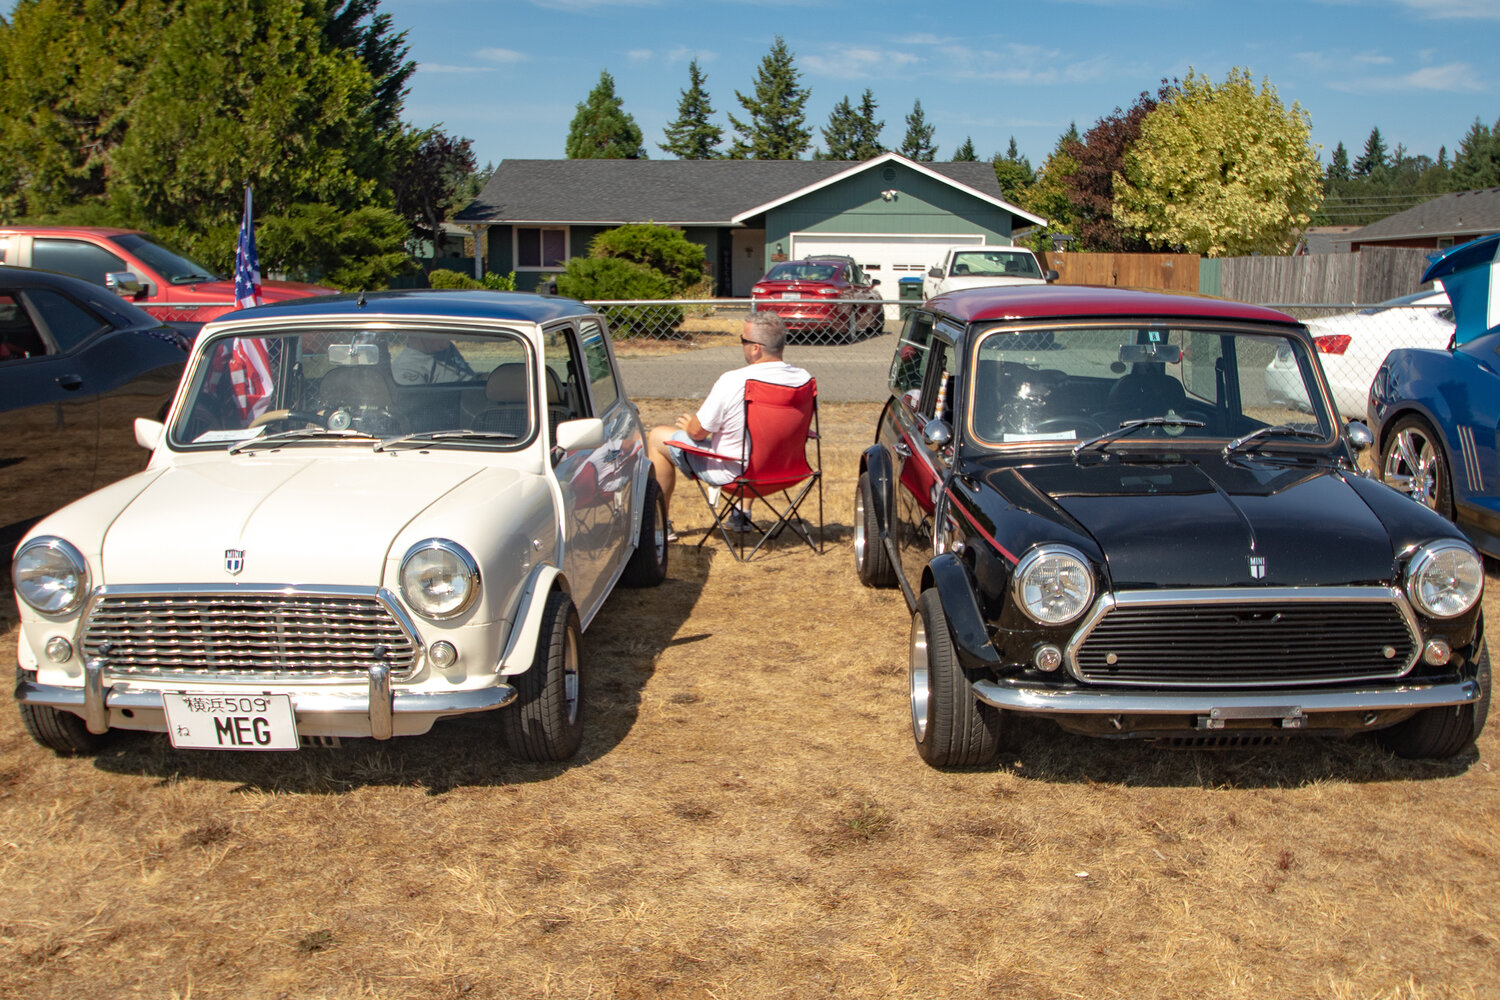 A 1996 Mini Cooper Rover owned by James Thompson of Graham, left, sits next to a 1992 Mini Cooper Rover owned by Ben Compton of Port Orchard on Saturday, Sept. 2 in Wilkowski Park for the 16th annual Military Heroes Car Show in Rainier.